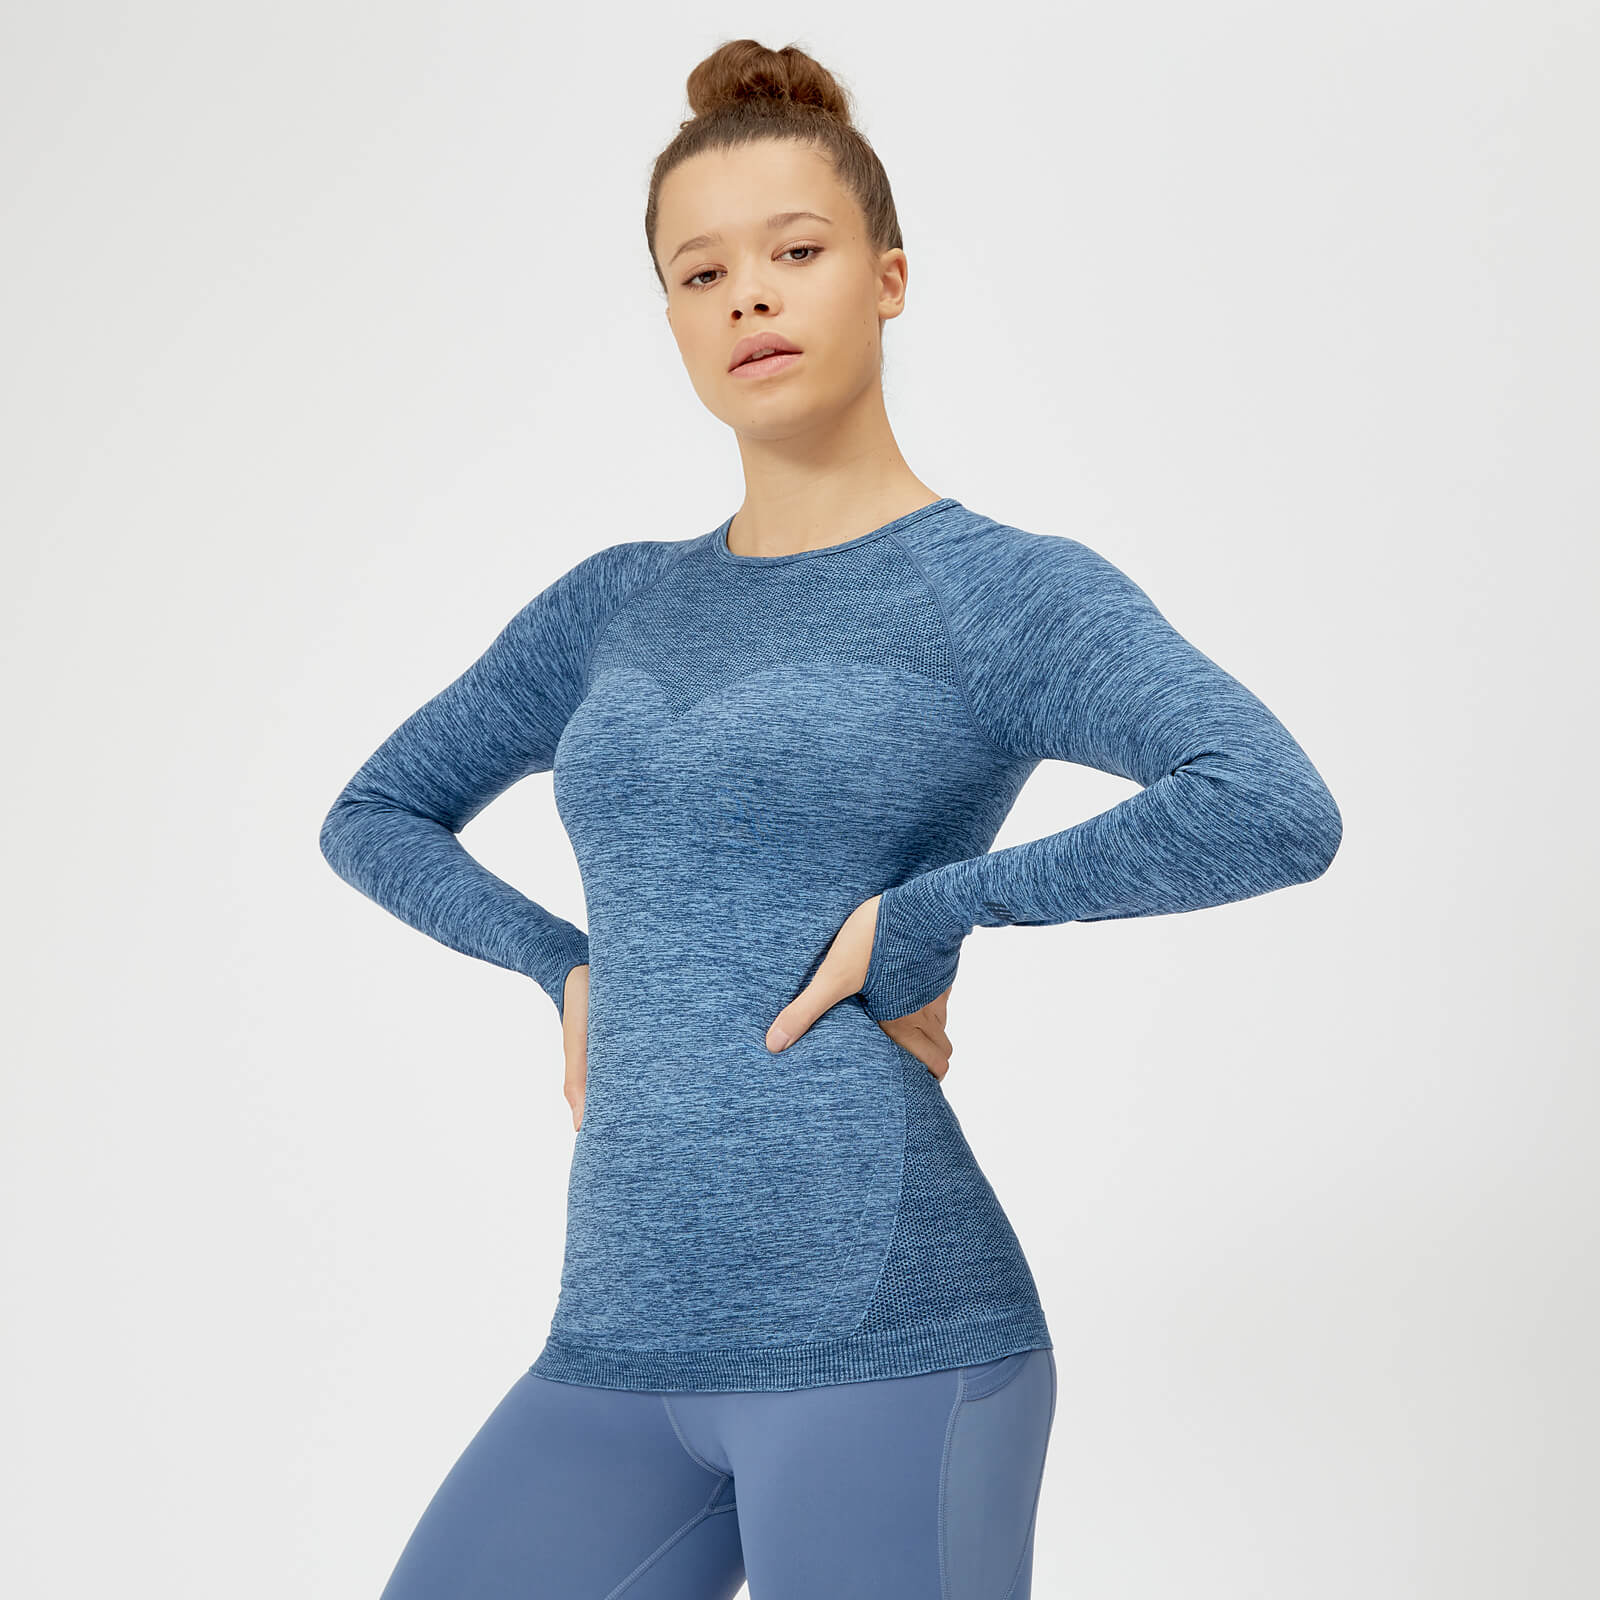 Myprotein Inspire Seamless Long Sleeve Top - Blue